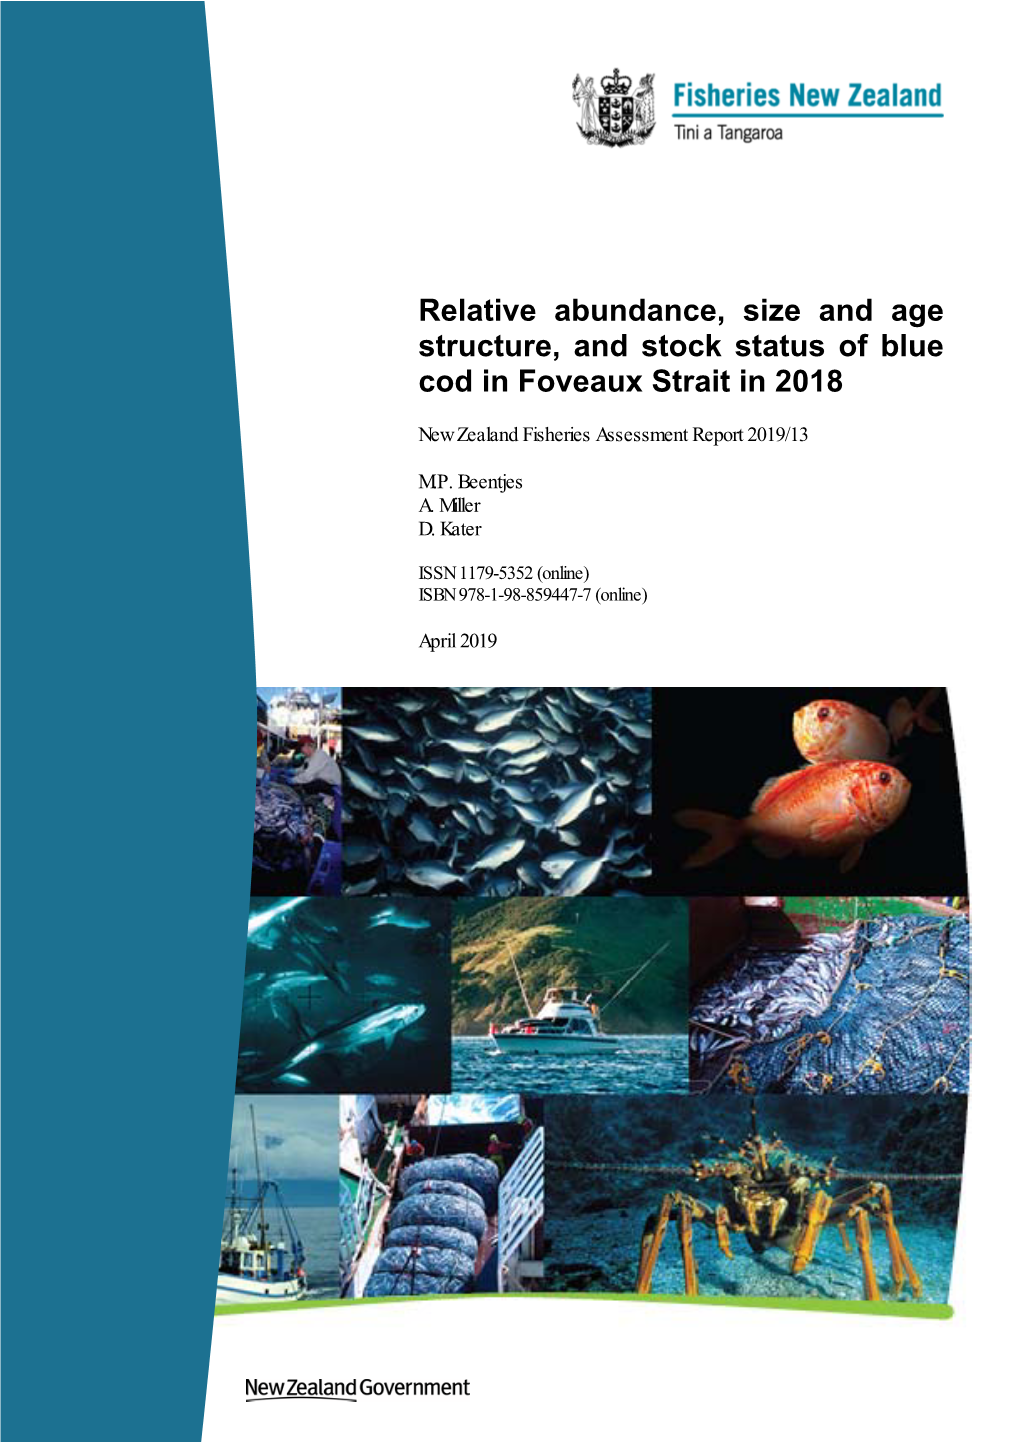 Relative Abundance, Size and Age Structure, and Stock Status of Blue Cod in Foveaux Strait in 2018